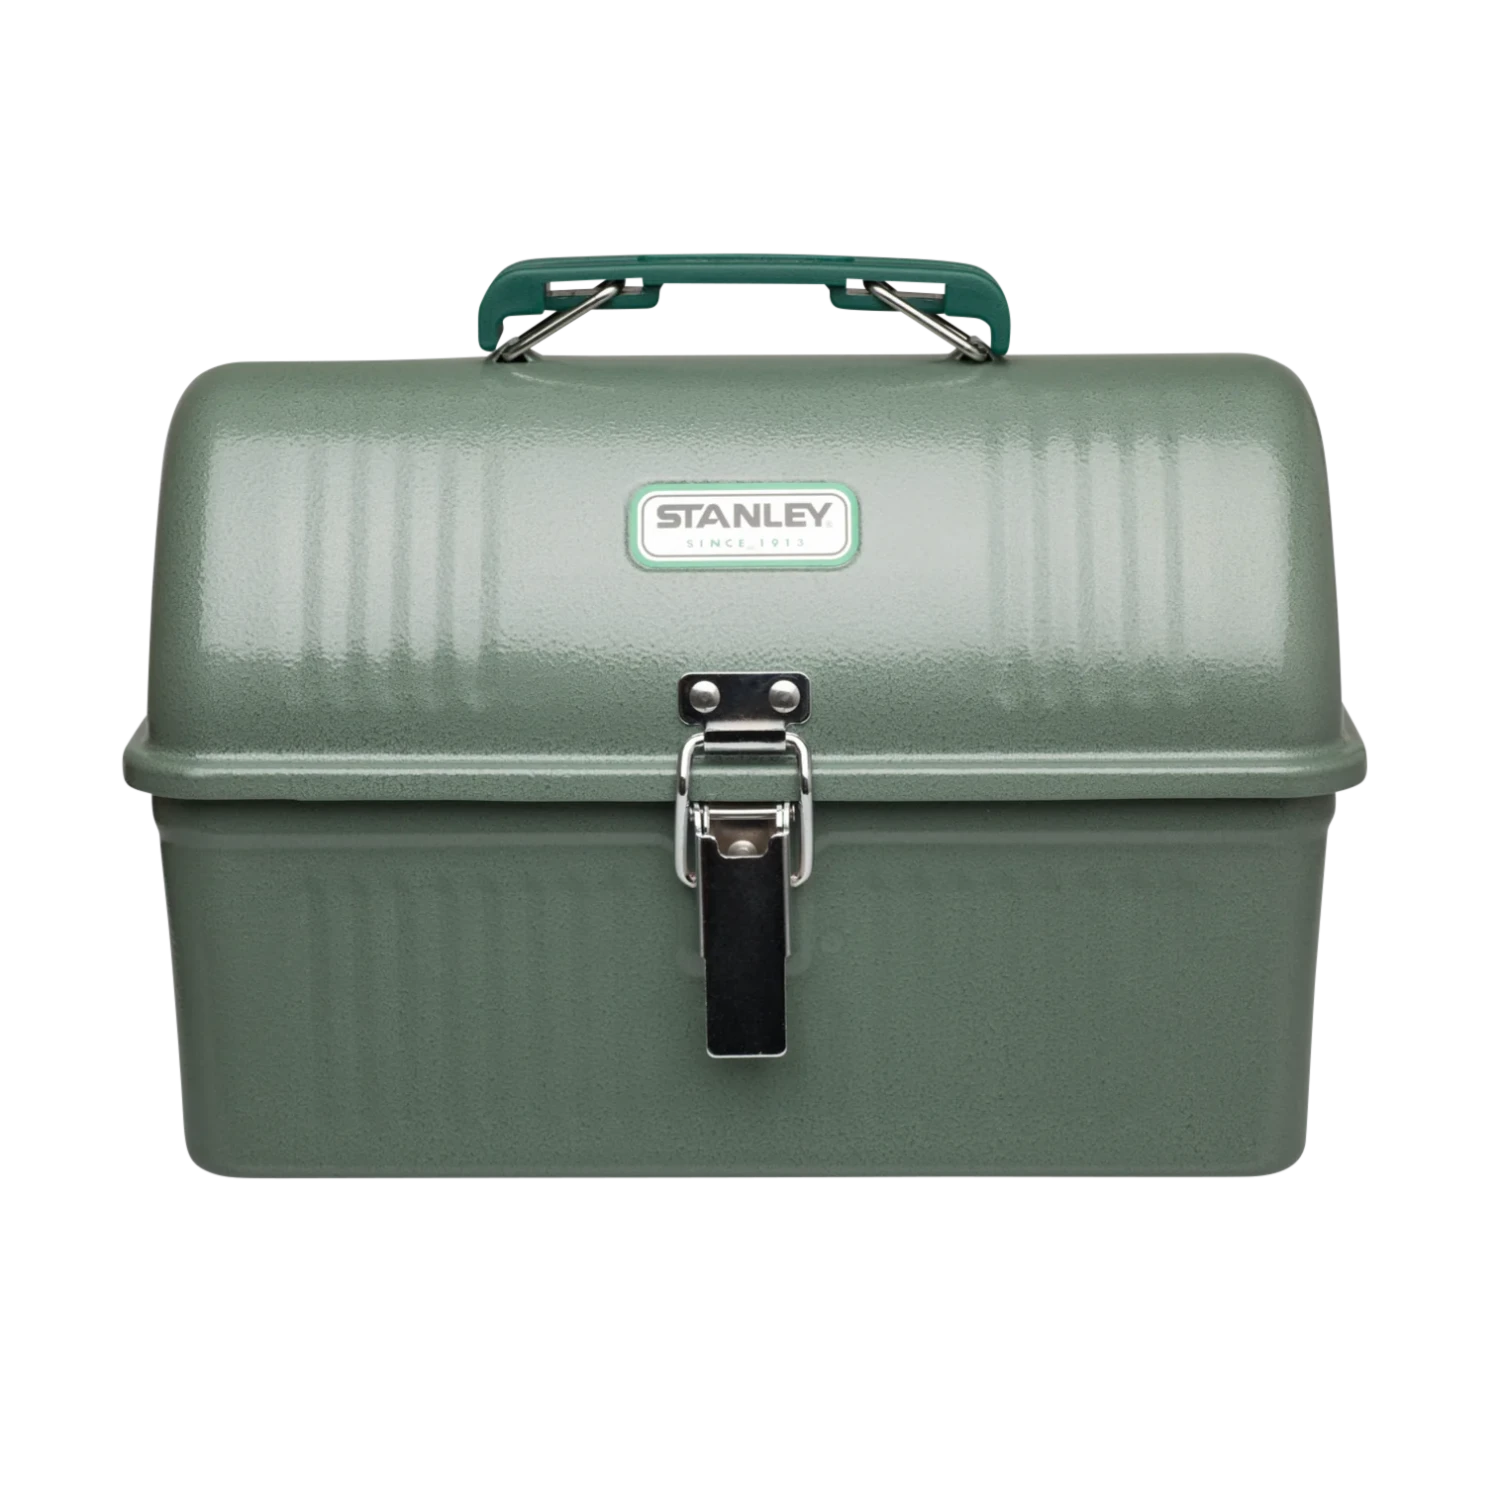 Stanley Classic Lunch Box 5.5 QT in hammertone green front